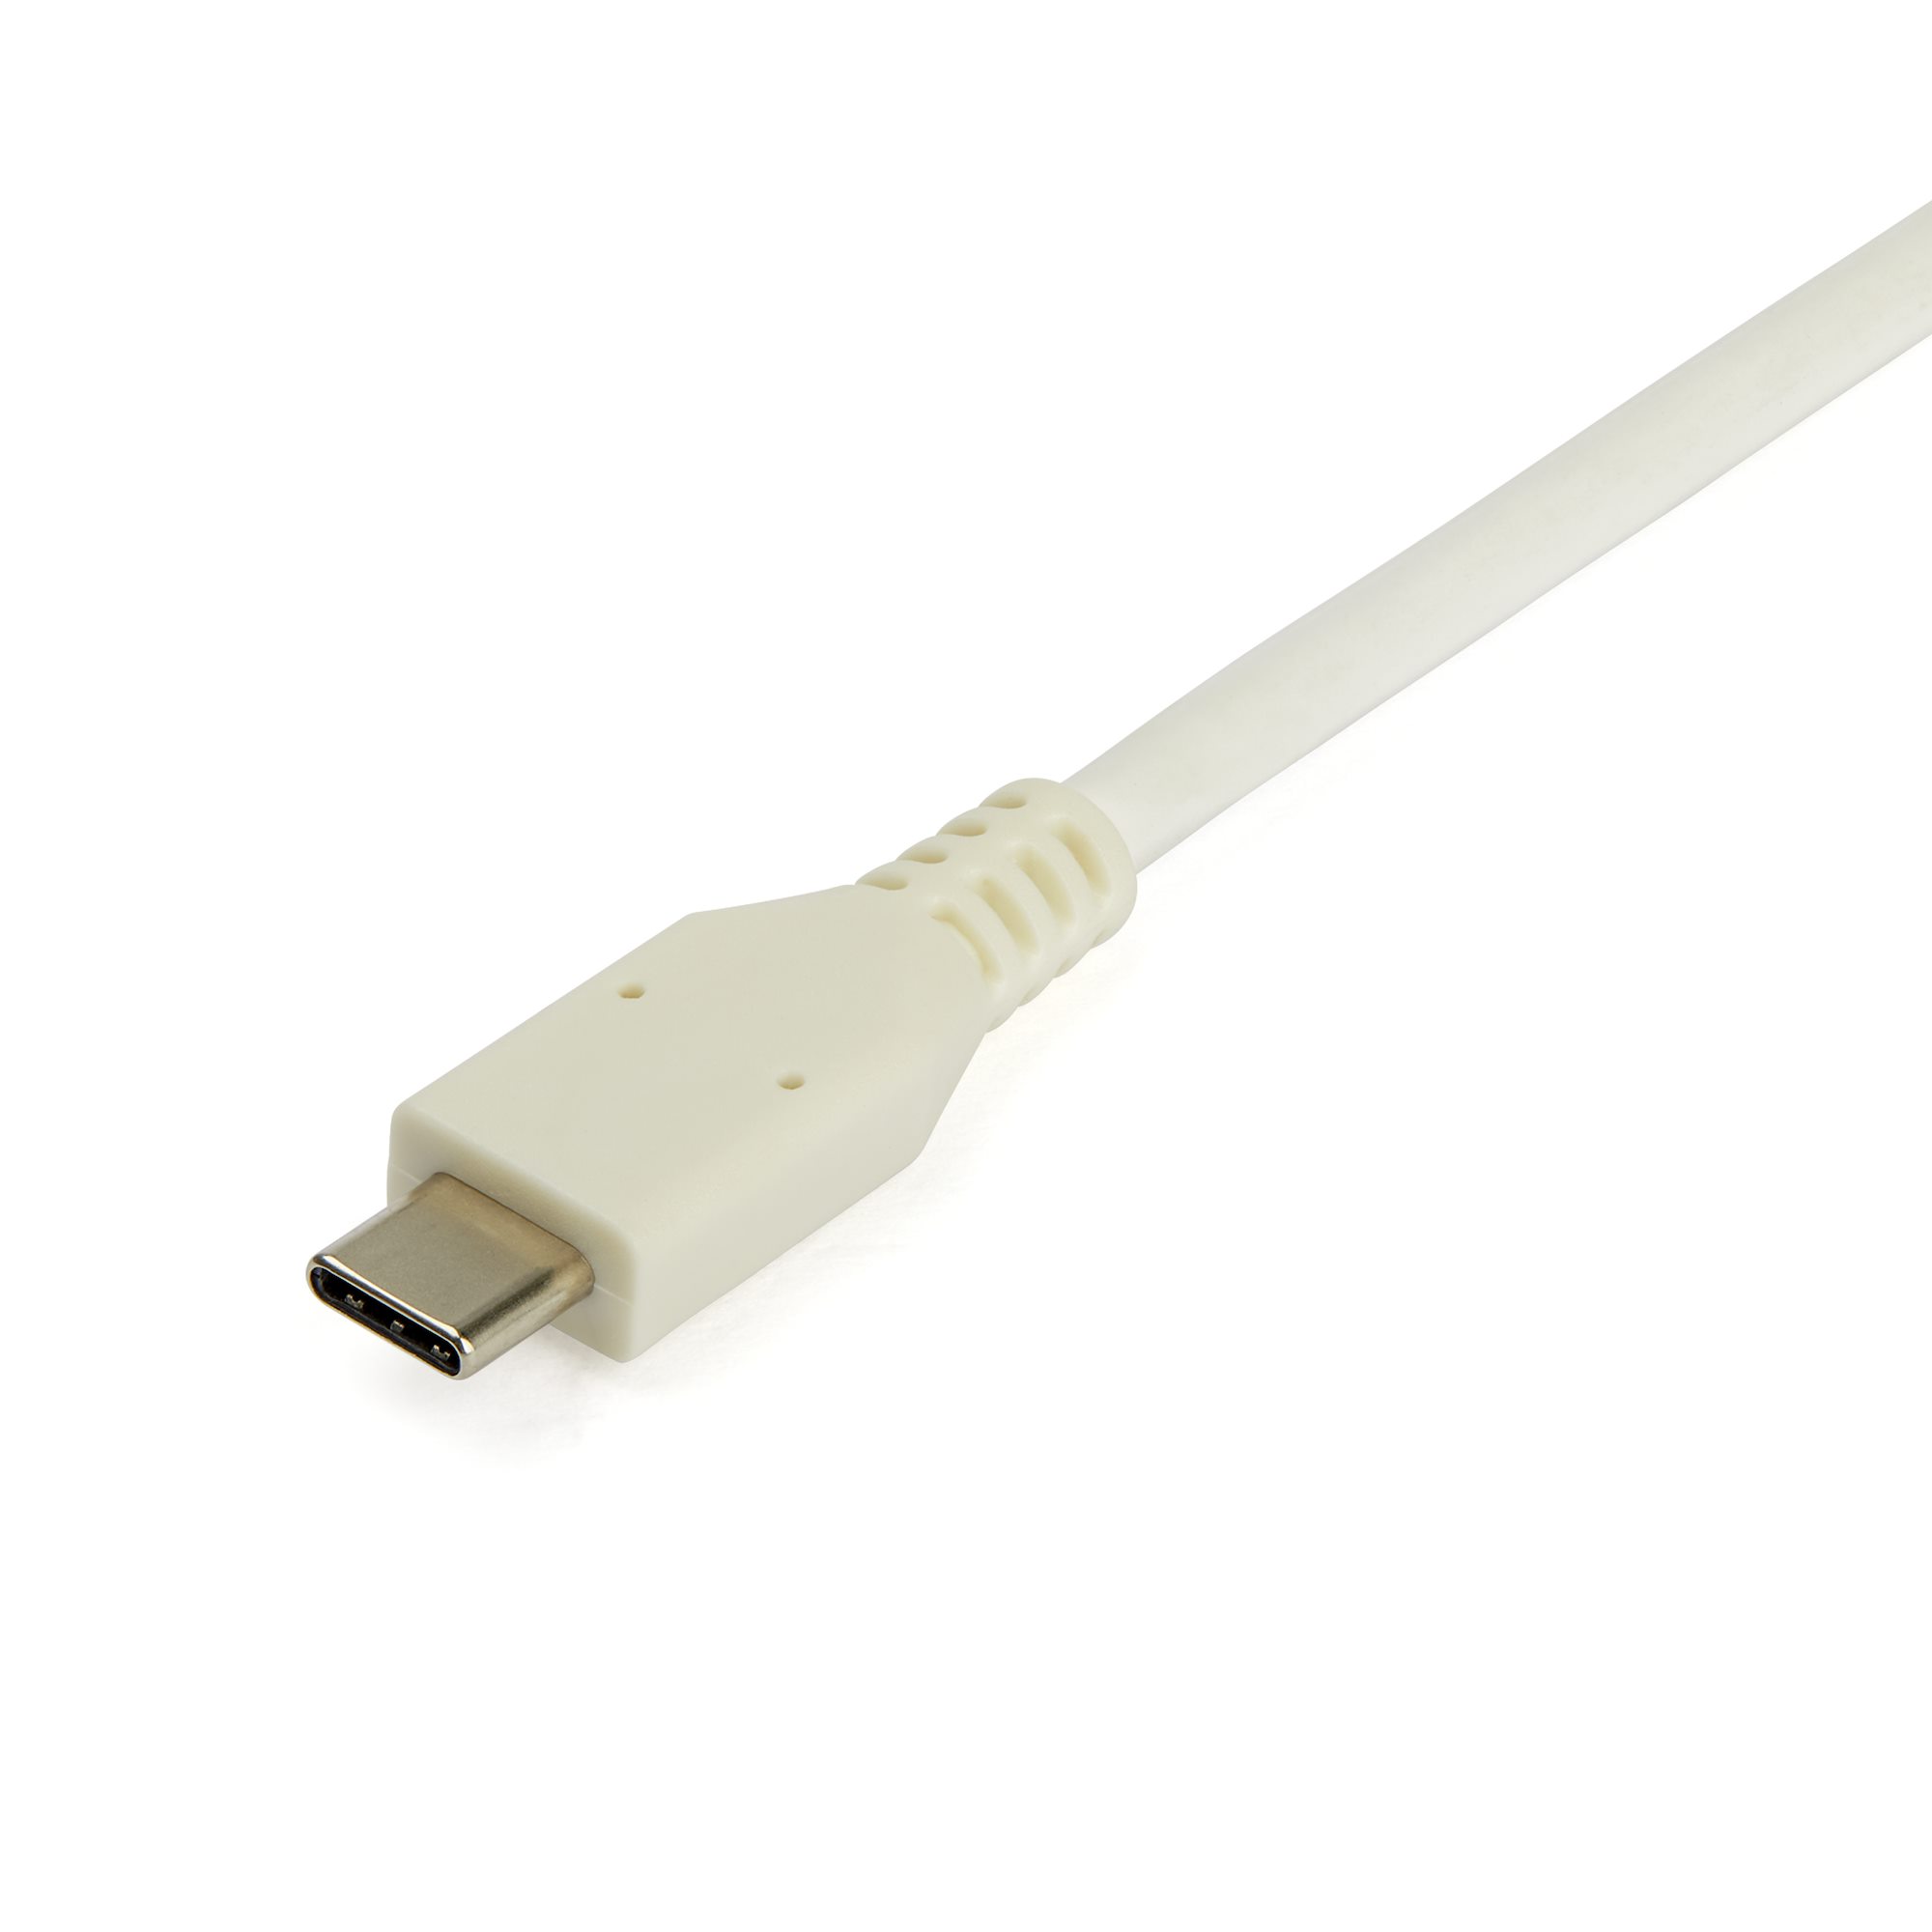 White StarTech.com USB C to Gigabit Ethernet Adapter USB 3.1 to RJ45 LAN Network Adapter USB Type C to Ethernet US1GC30W 